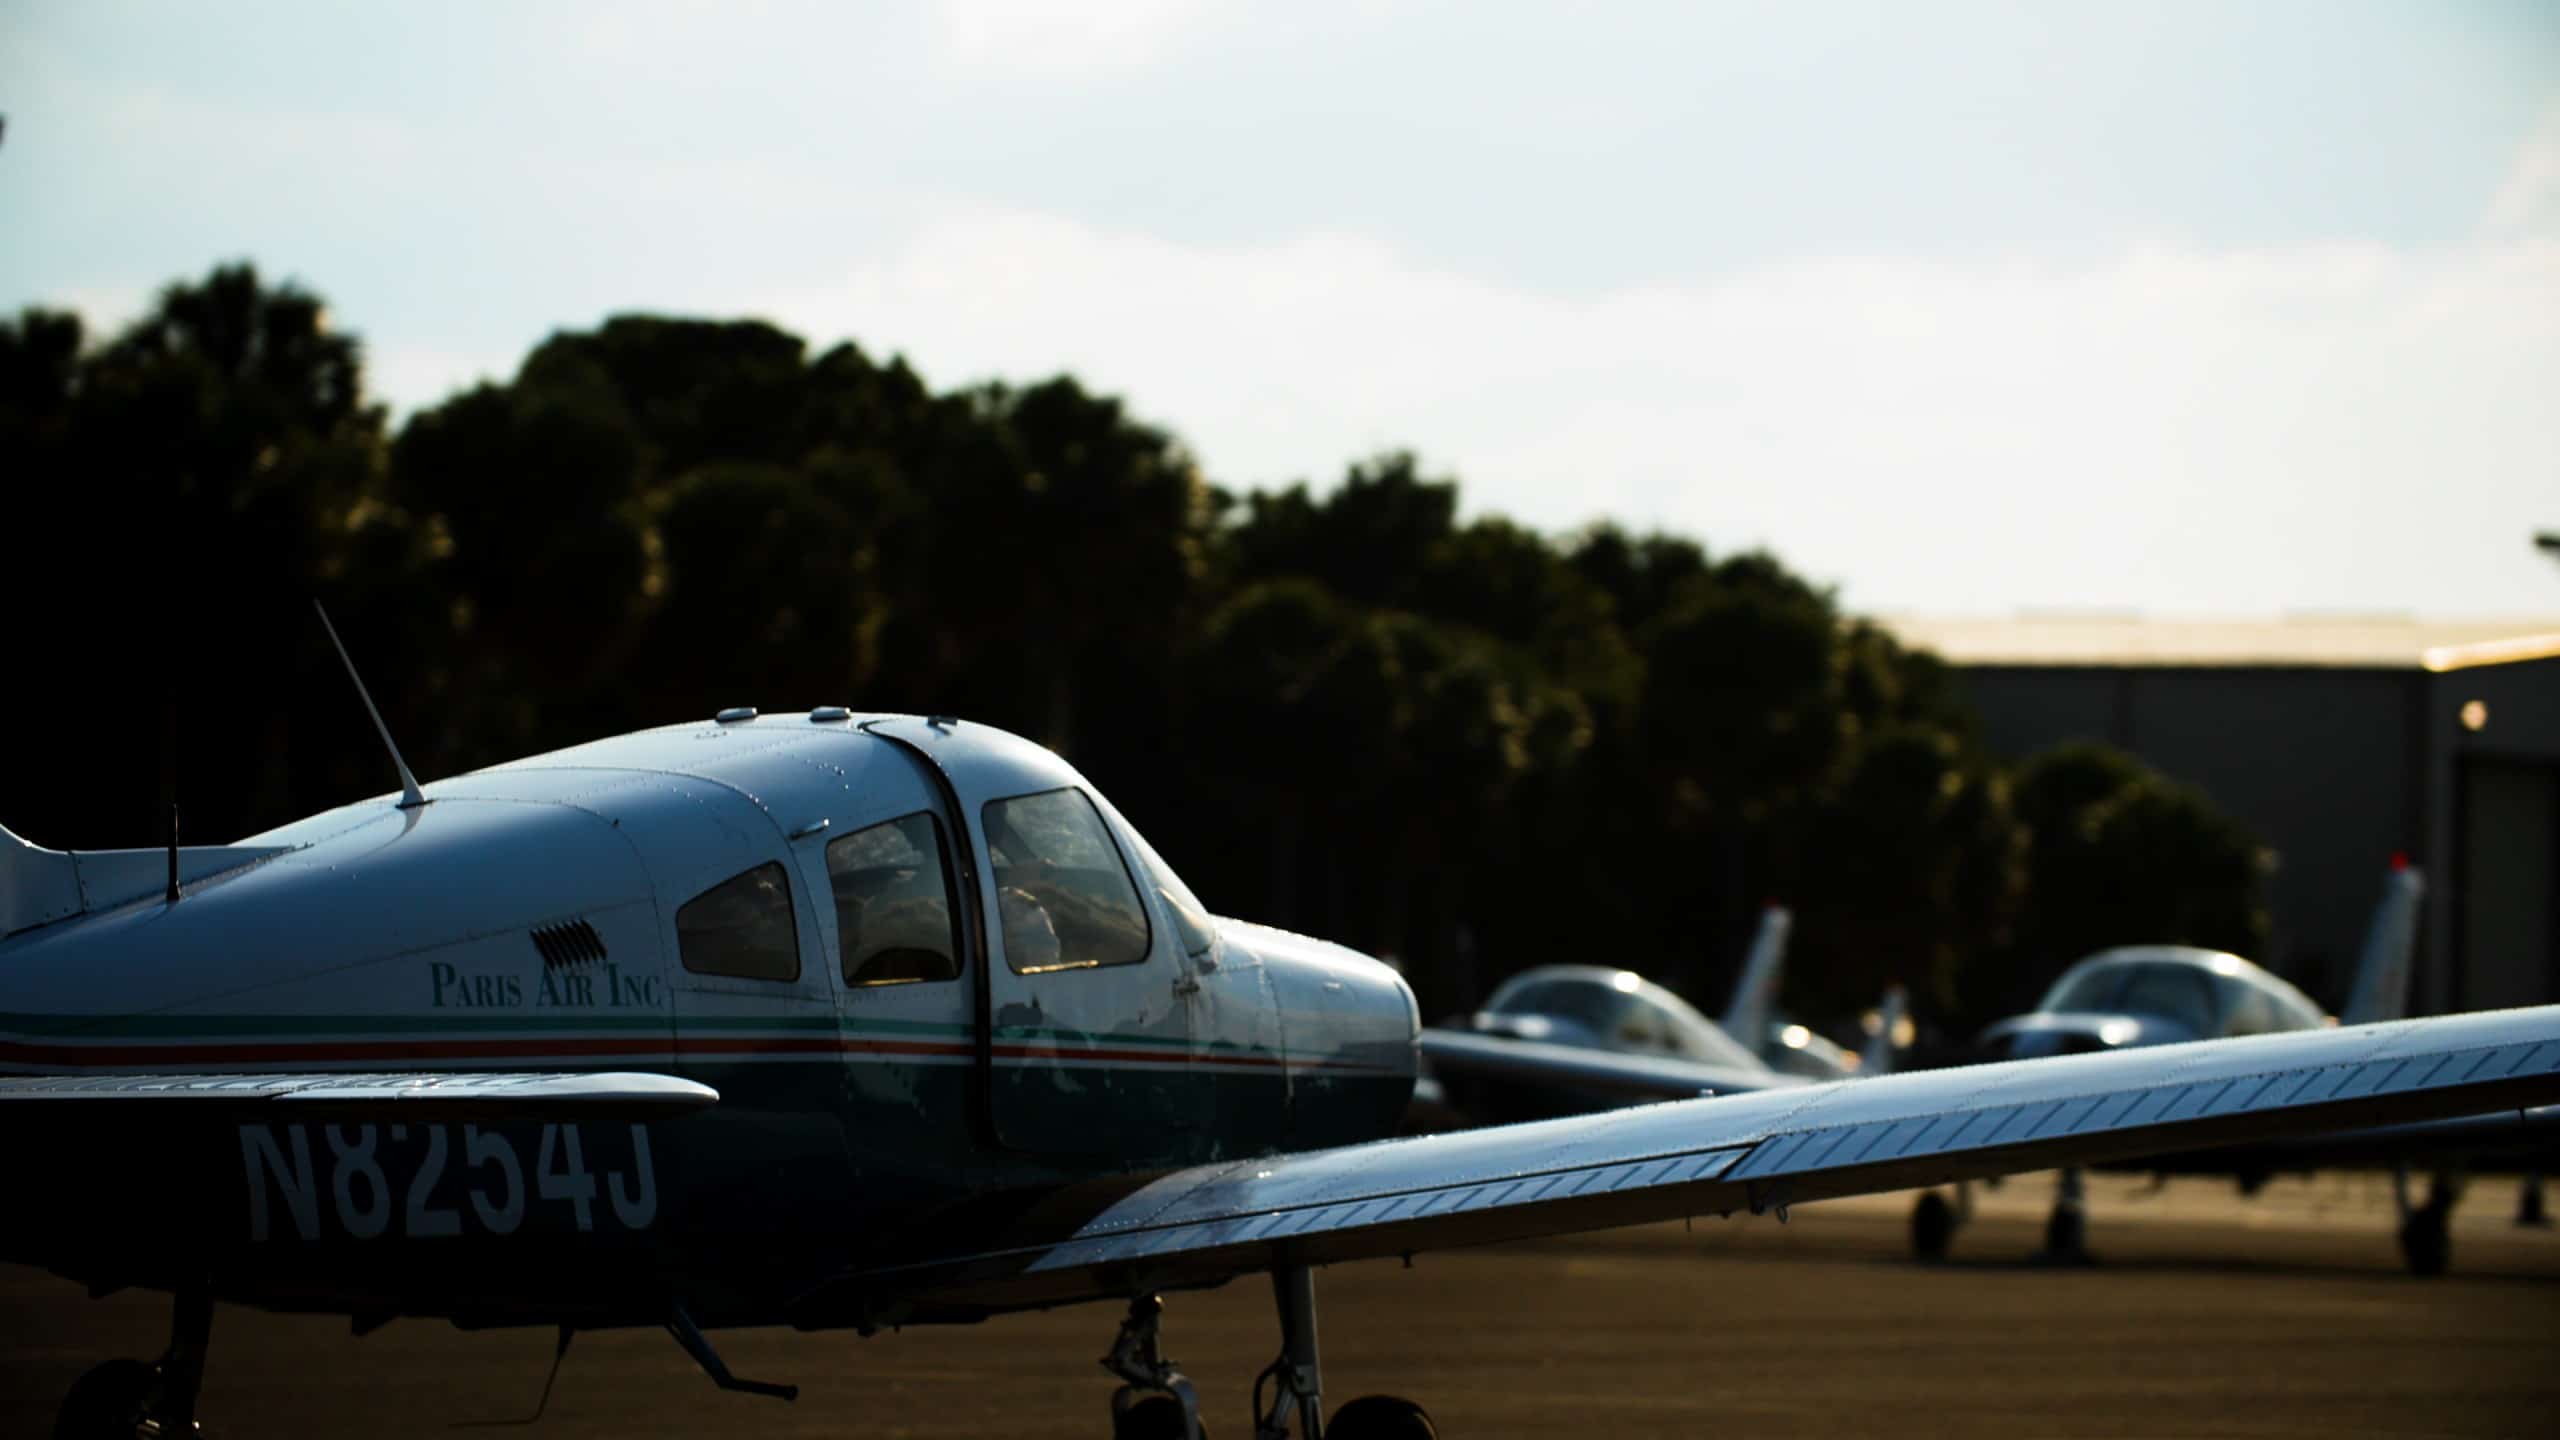 A Paris Air small airplane parked on the tarmac in evening light